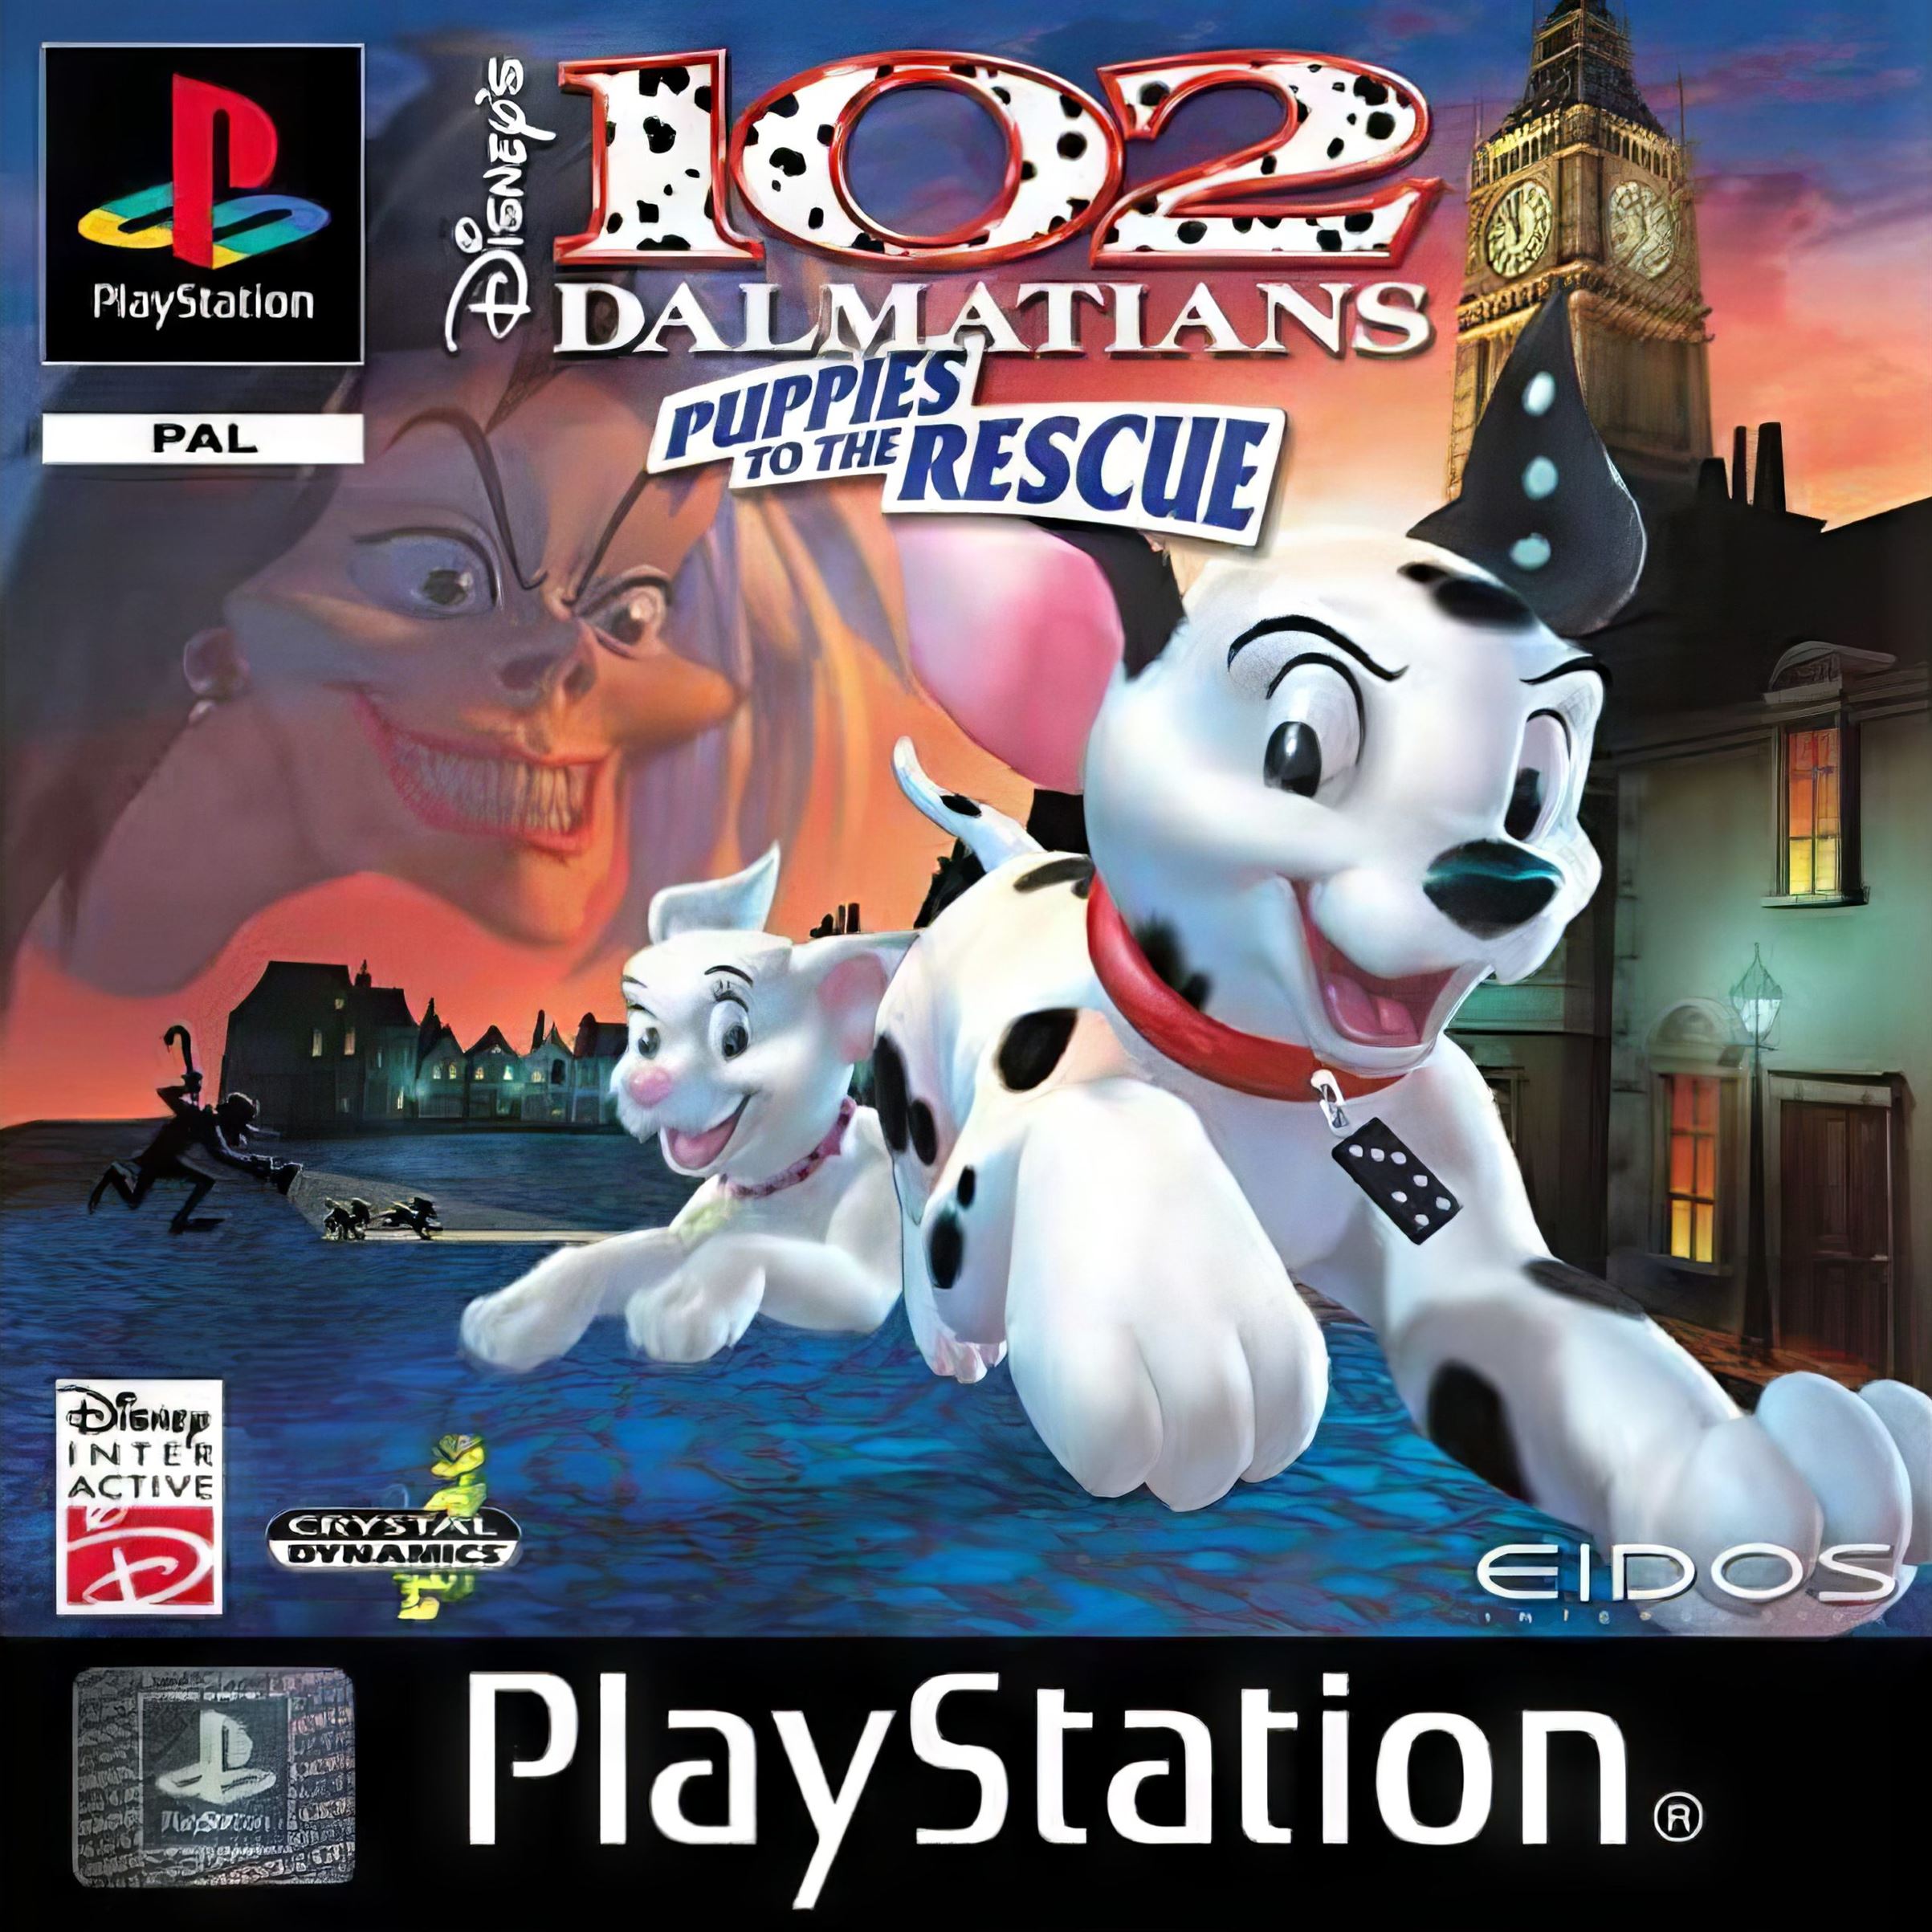 102 Dalmatians: Puppies to the Rescue – PlayStation 1 Game Review